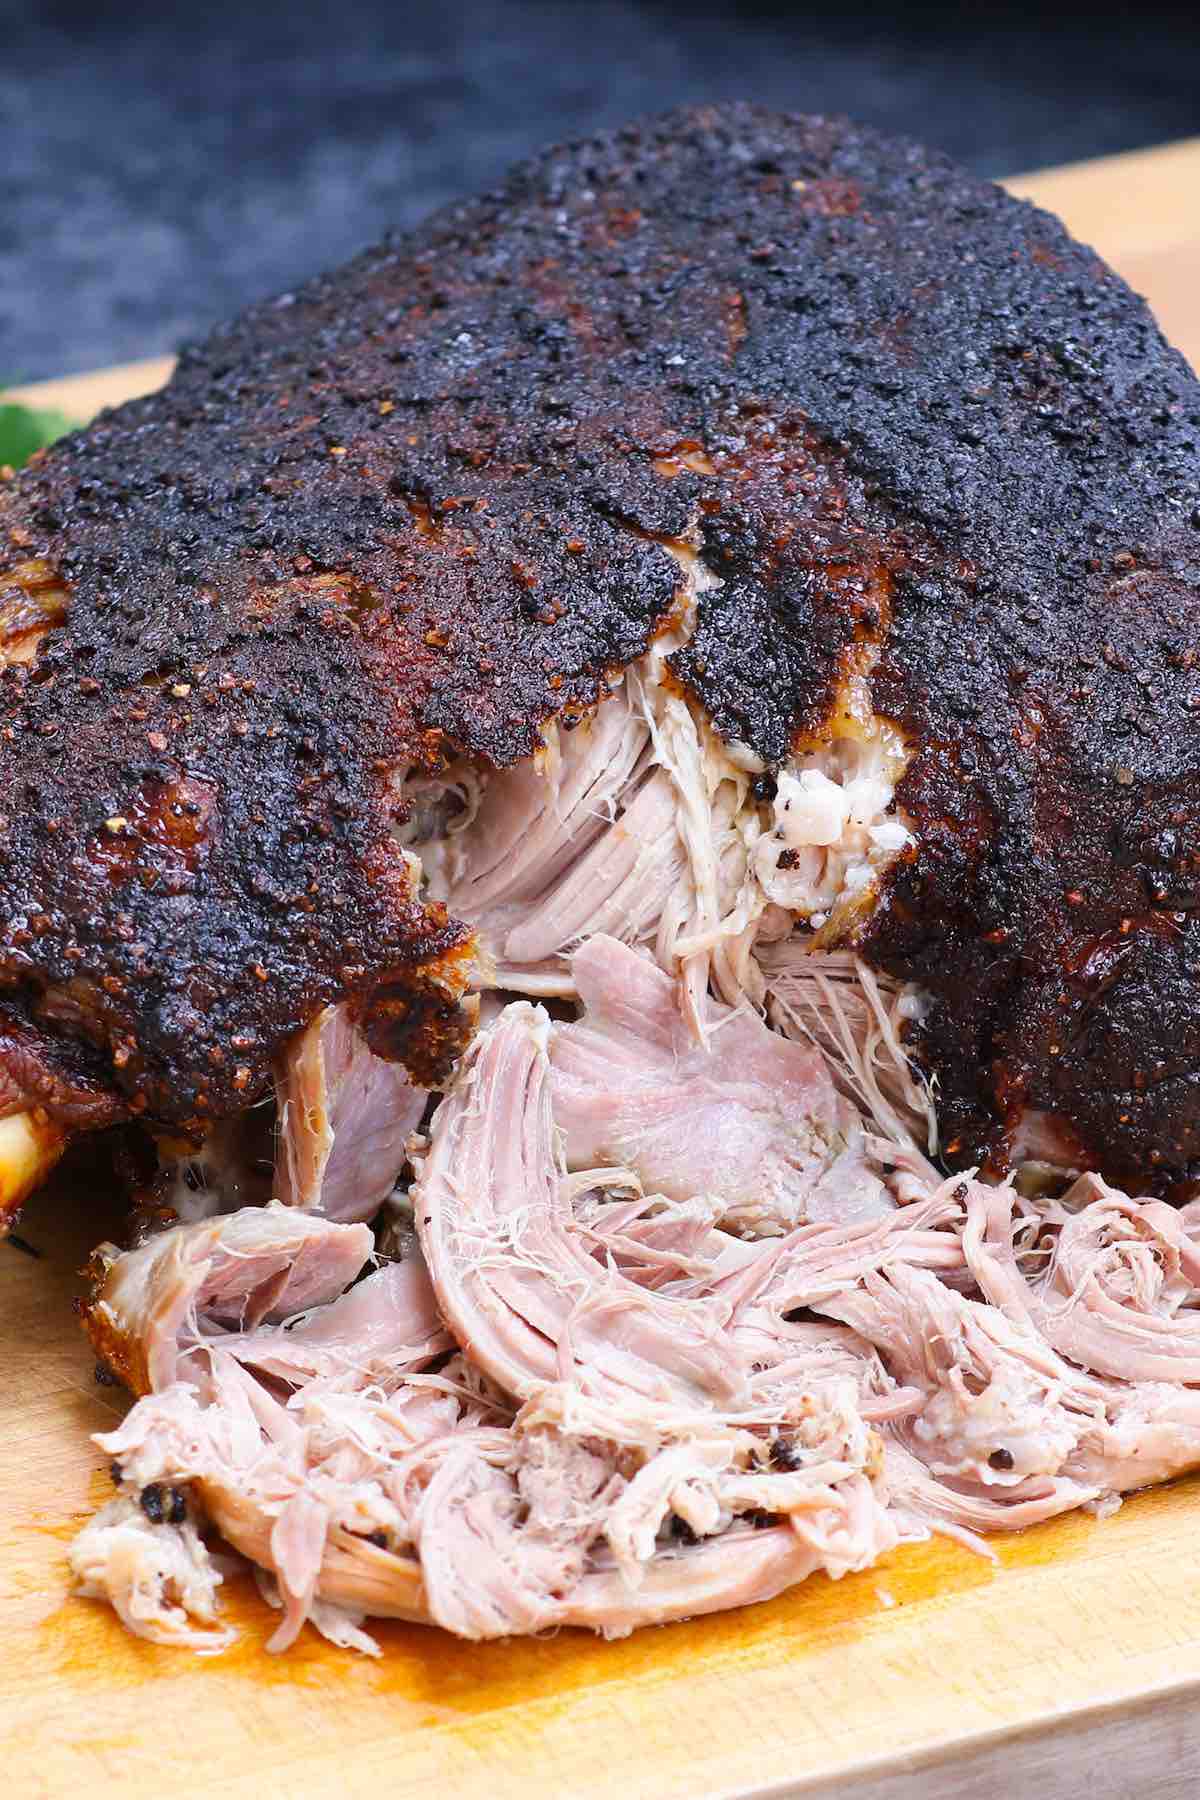 A large pork shoulder smoked to perfection with beautiful crispy bark on the outside and shredded pulled pork on the inside